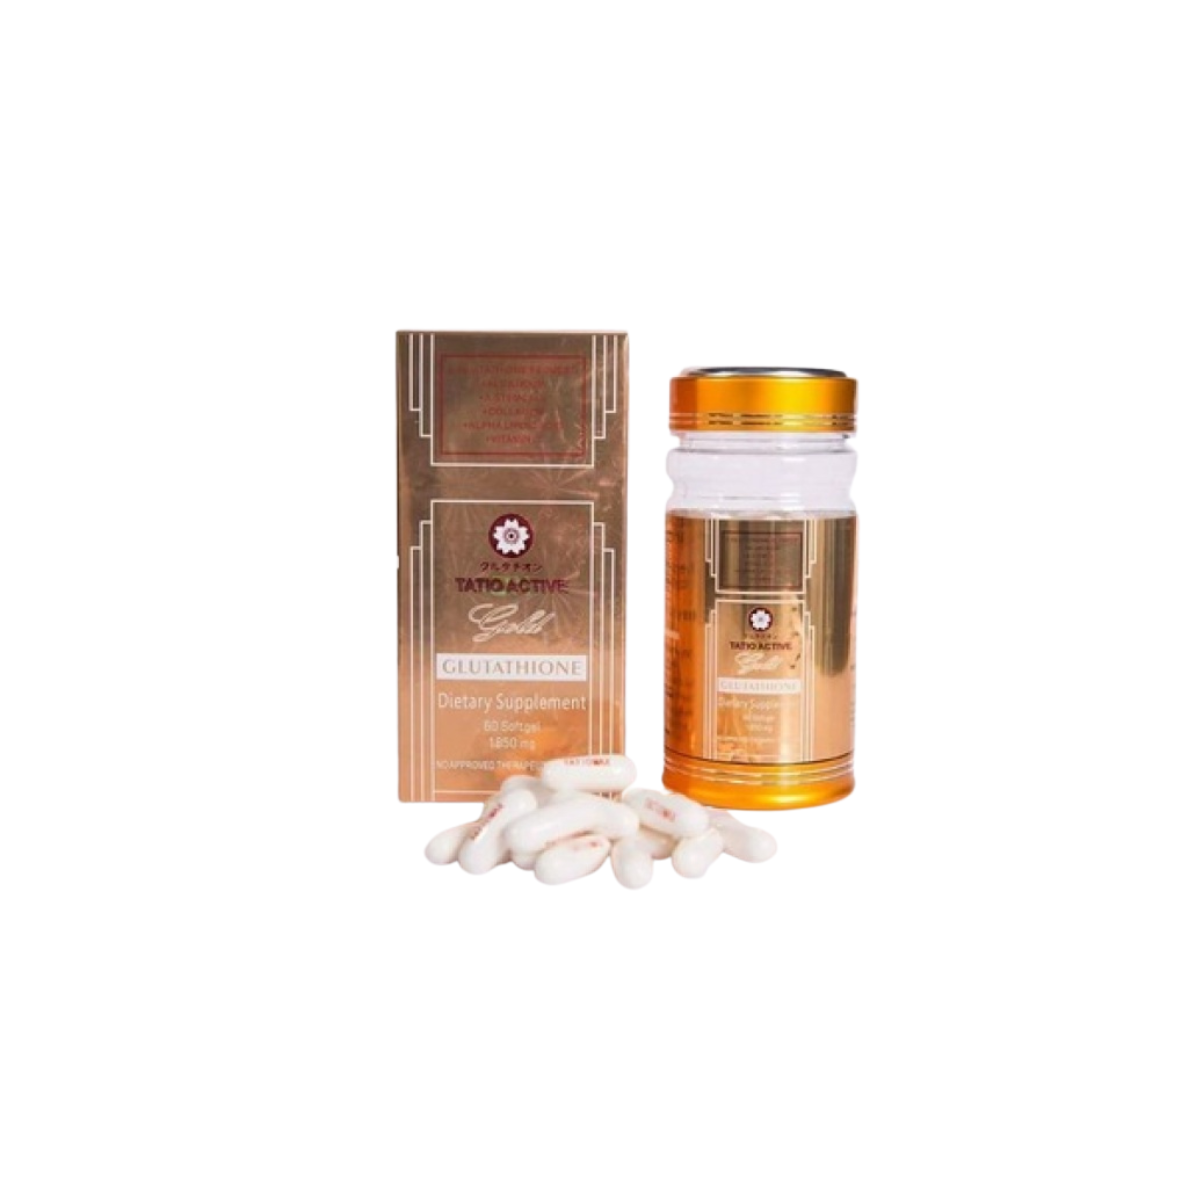 Tatio Active Gold Glutathione Whitening Gel Capsules With 1850MG